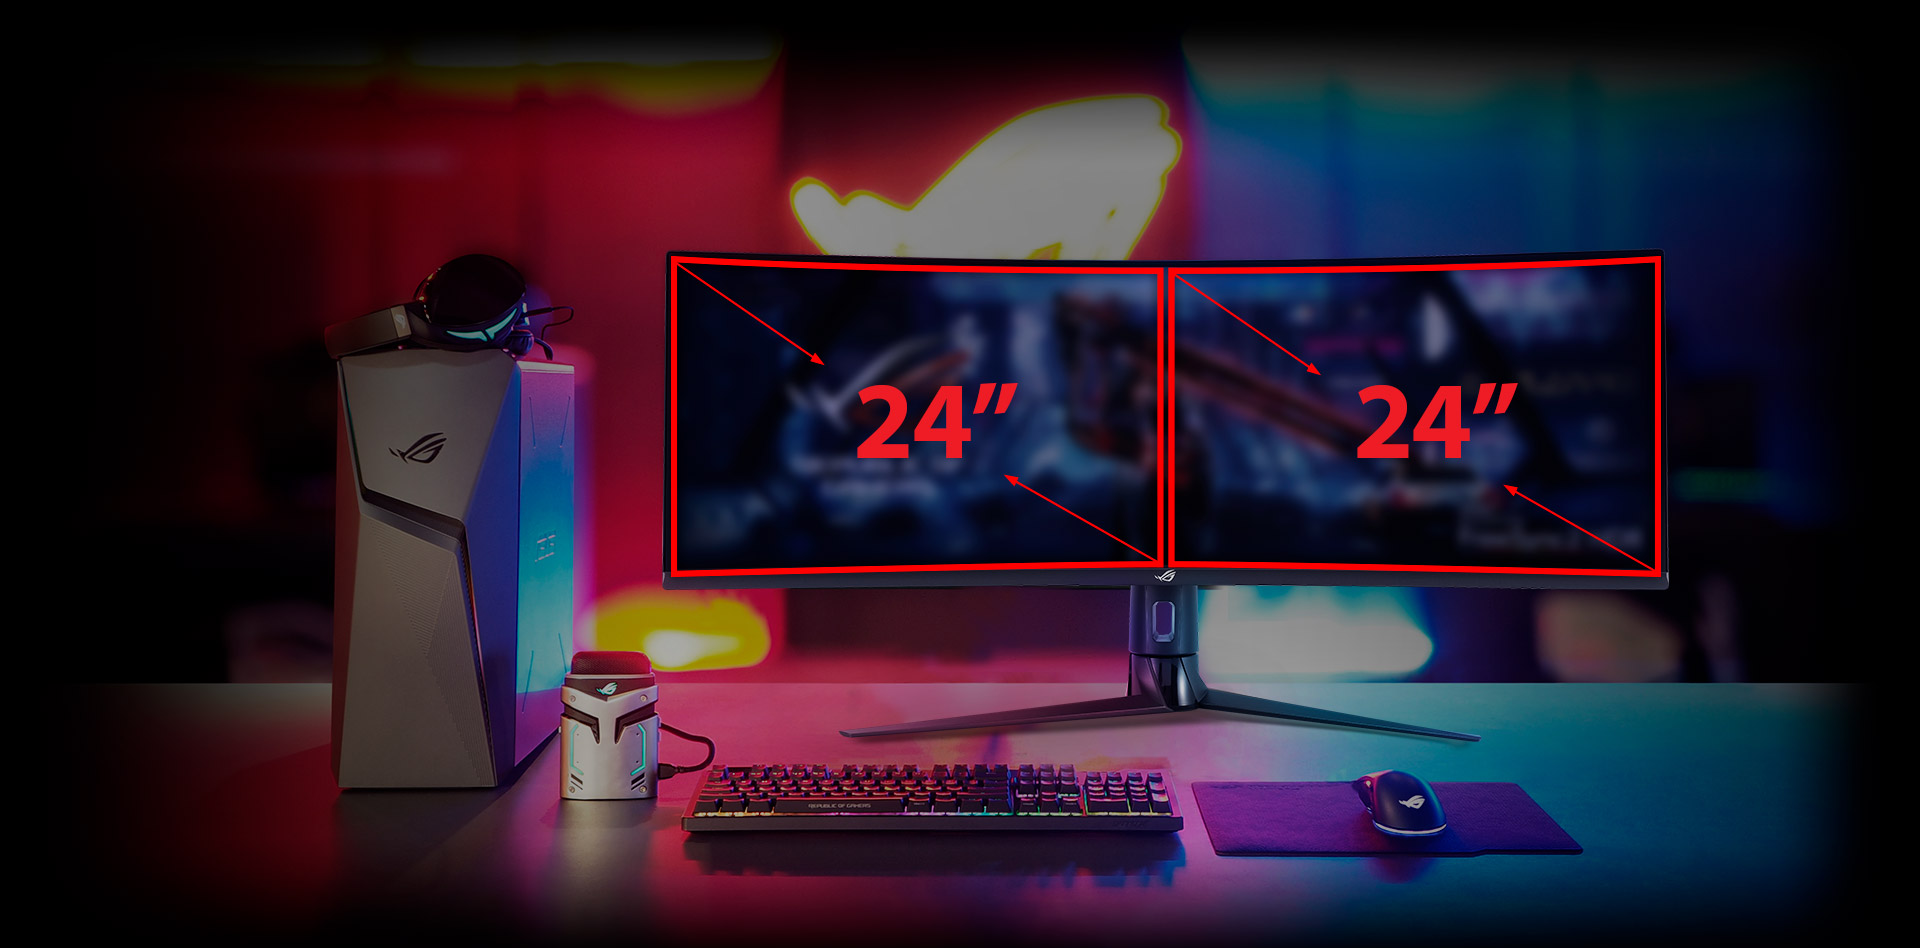 the width of the monitor is as 24 inch plus 24 inch side by side